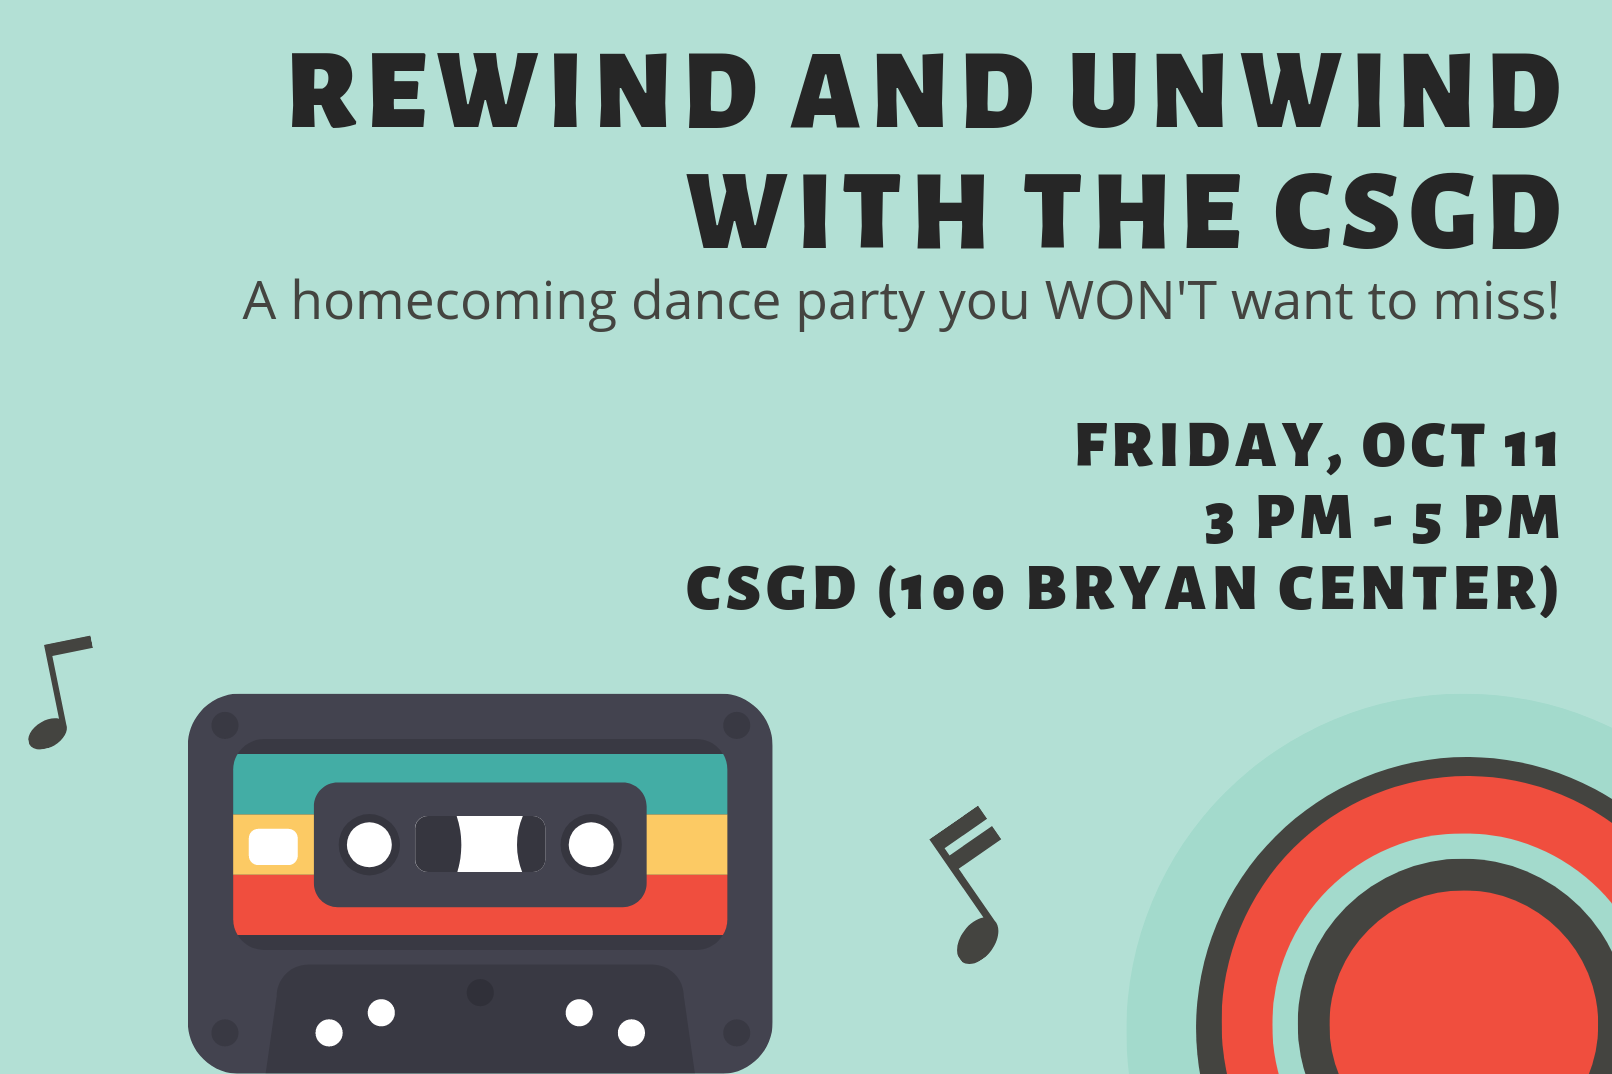 Text: Rewind and Unwind with the CSGD. A homecoming dance party you won&amp;#39;t want to miss. Friday October 11 rom 3PM to 5 PM. Backgrount includes teal backdrop featuring images of cassette tape and music notes